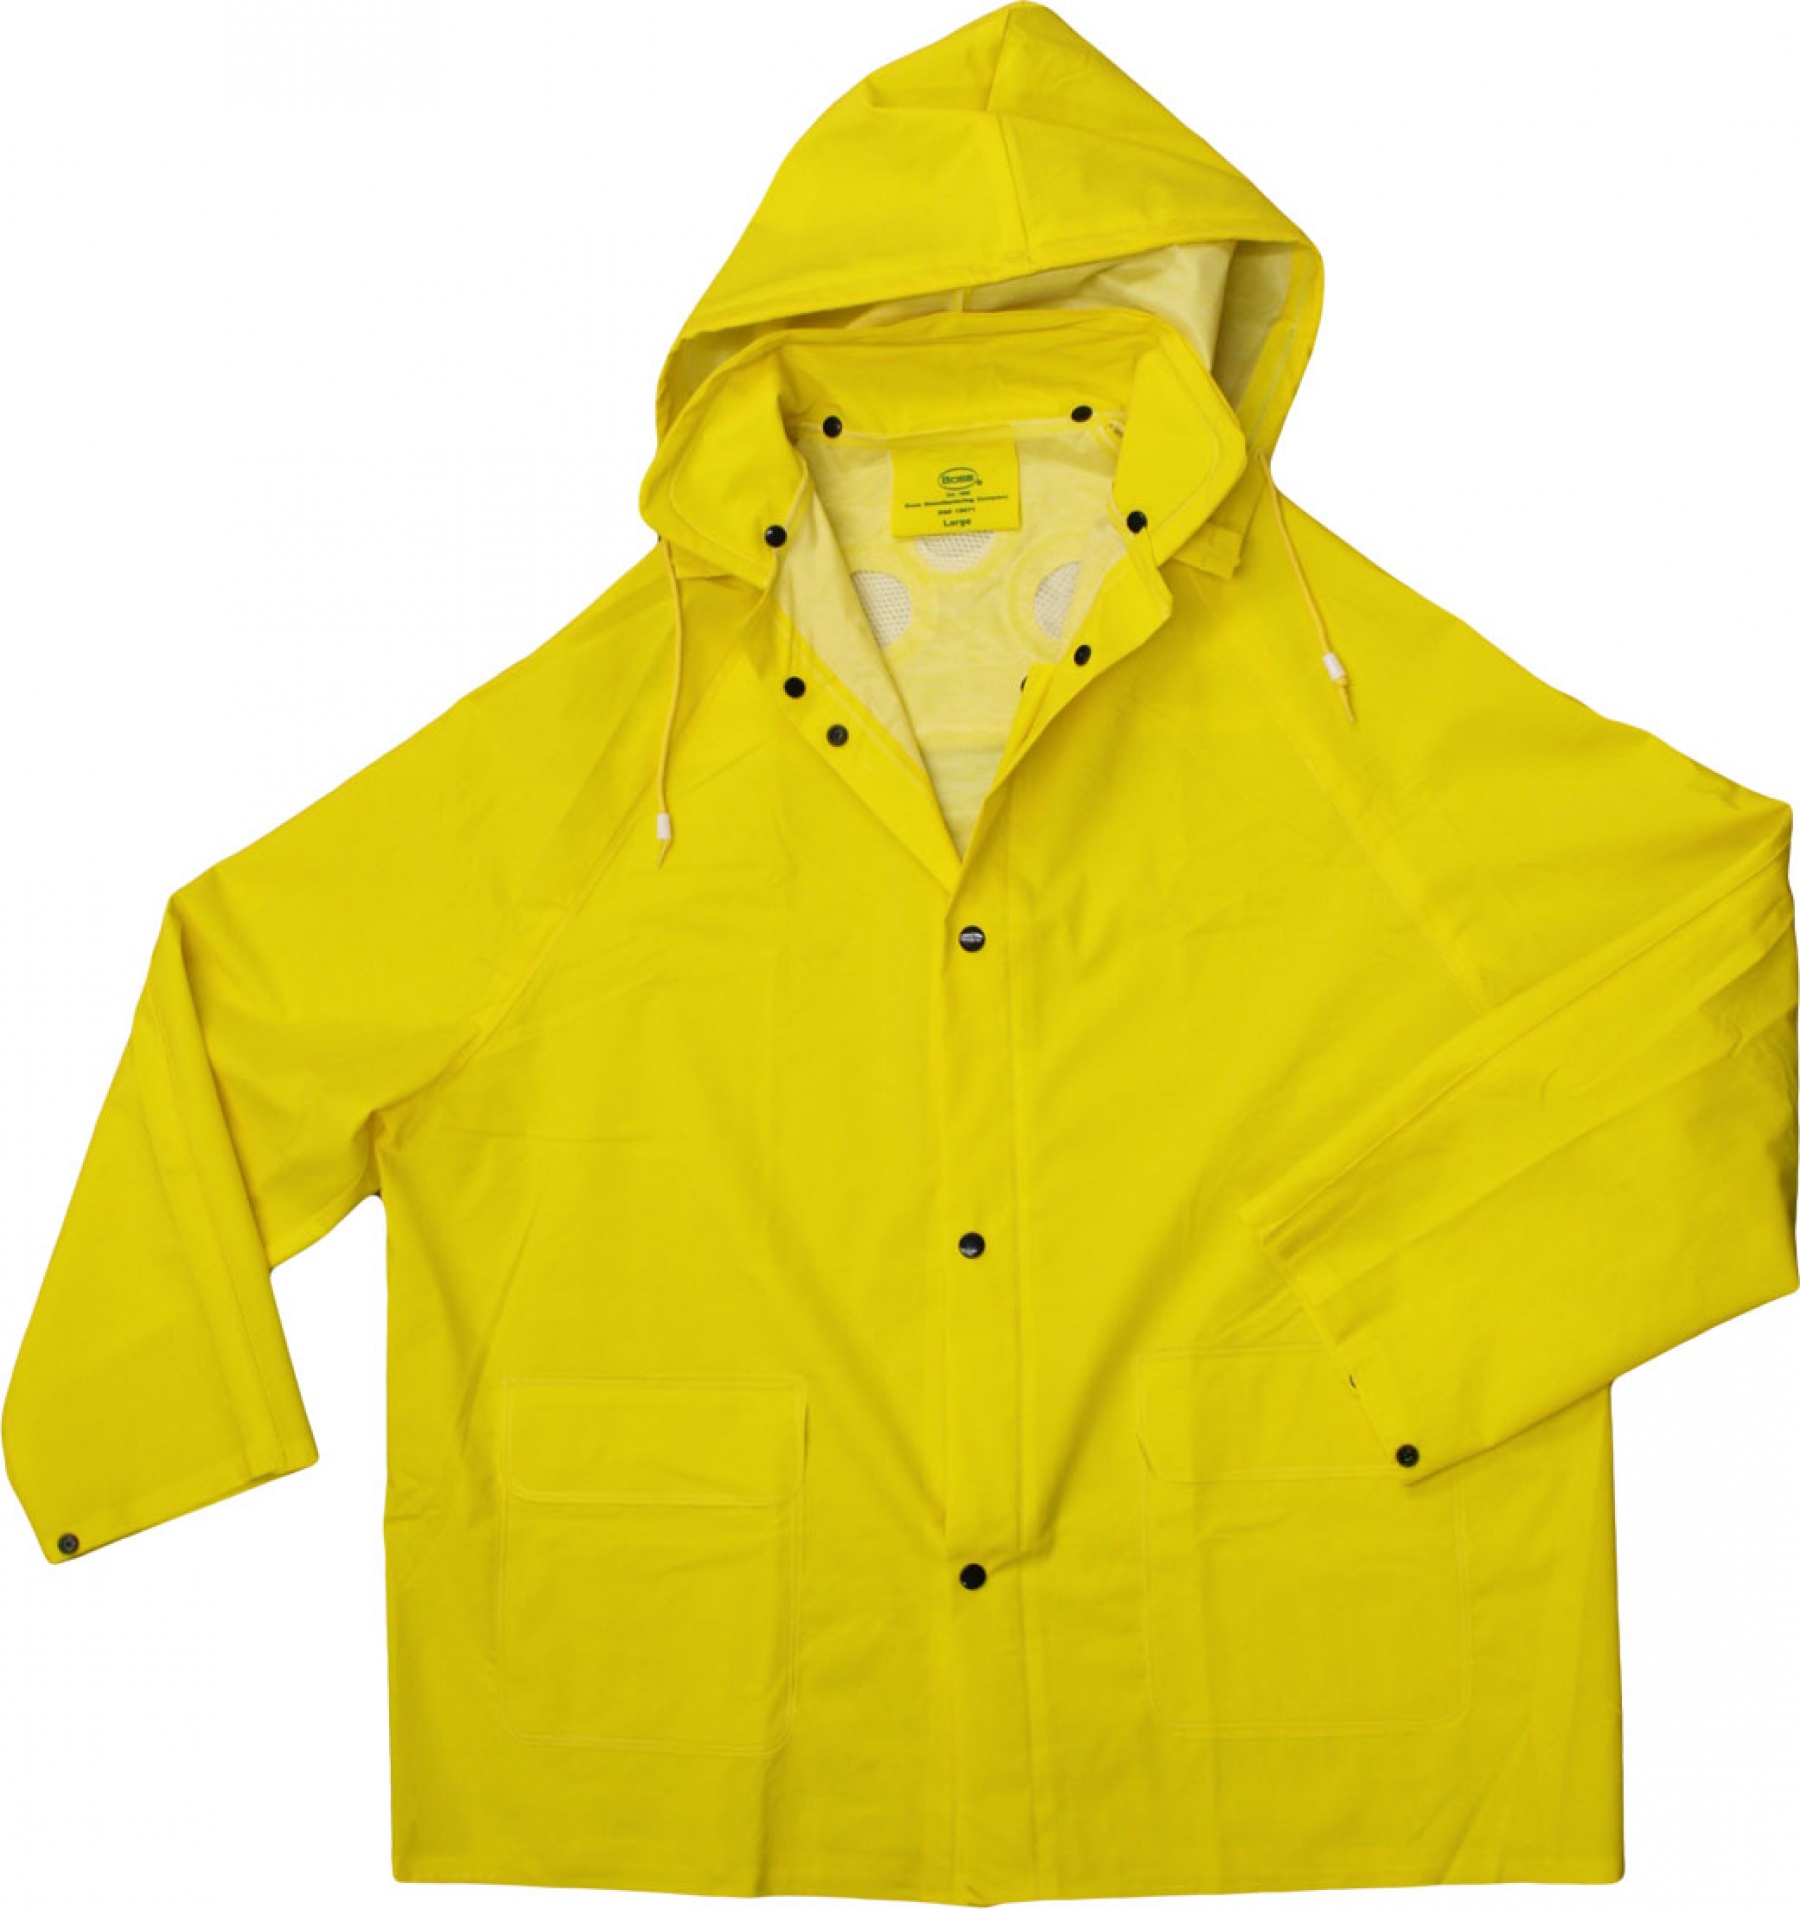 Buy Rain Suit | Rainwear, Emergency Supplies from Safety Supply Co ...